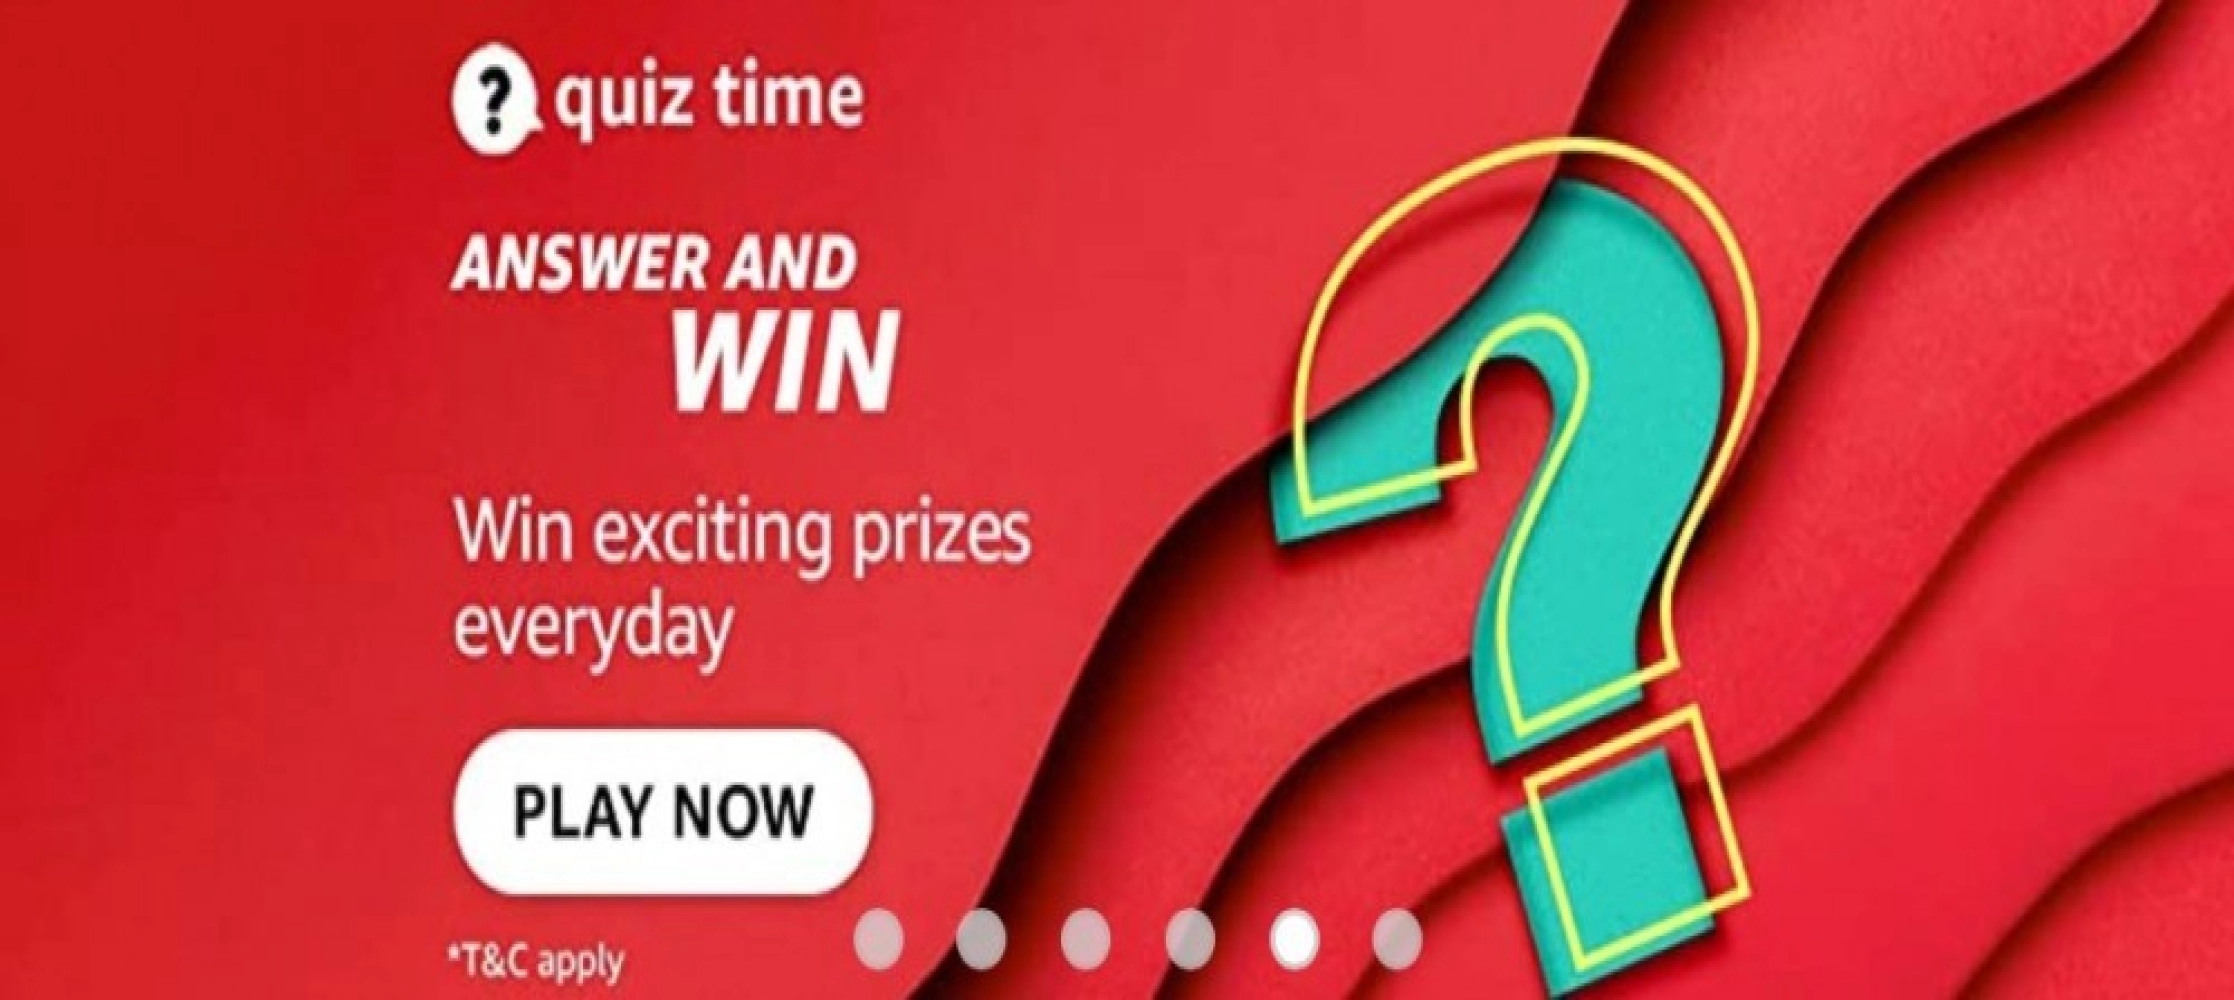 AMAZON QUIZ CONTEST: 13 MAY, 2022 - ANSWER TODAY FOR THE QUESTIONS AND GET A CHANCE TO WIN AMAZON PAY RS.40,000